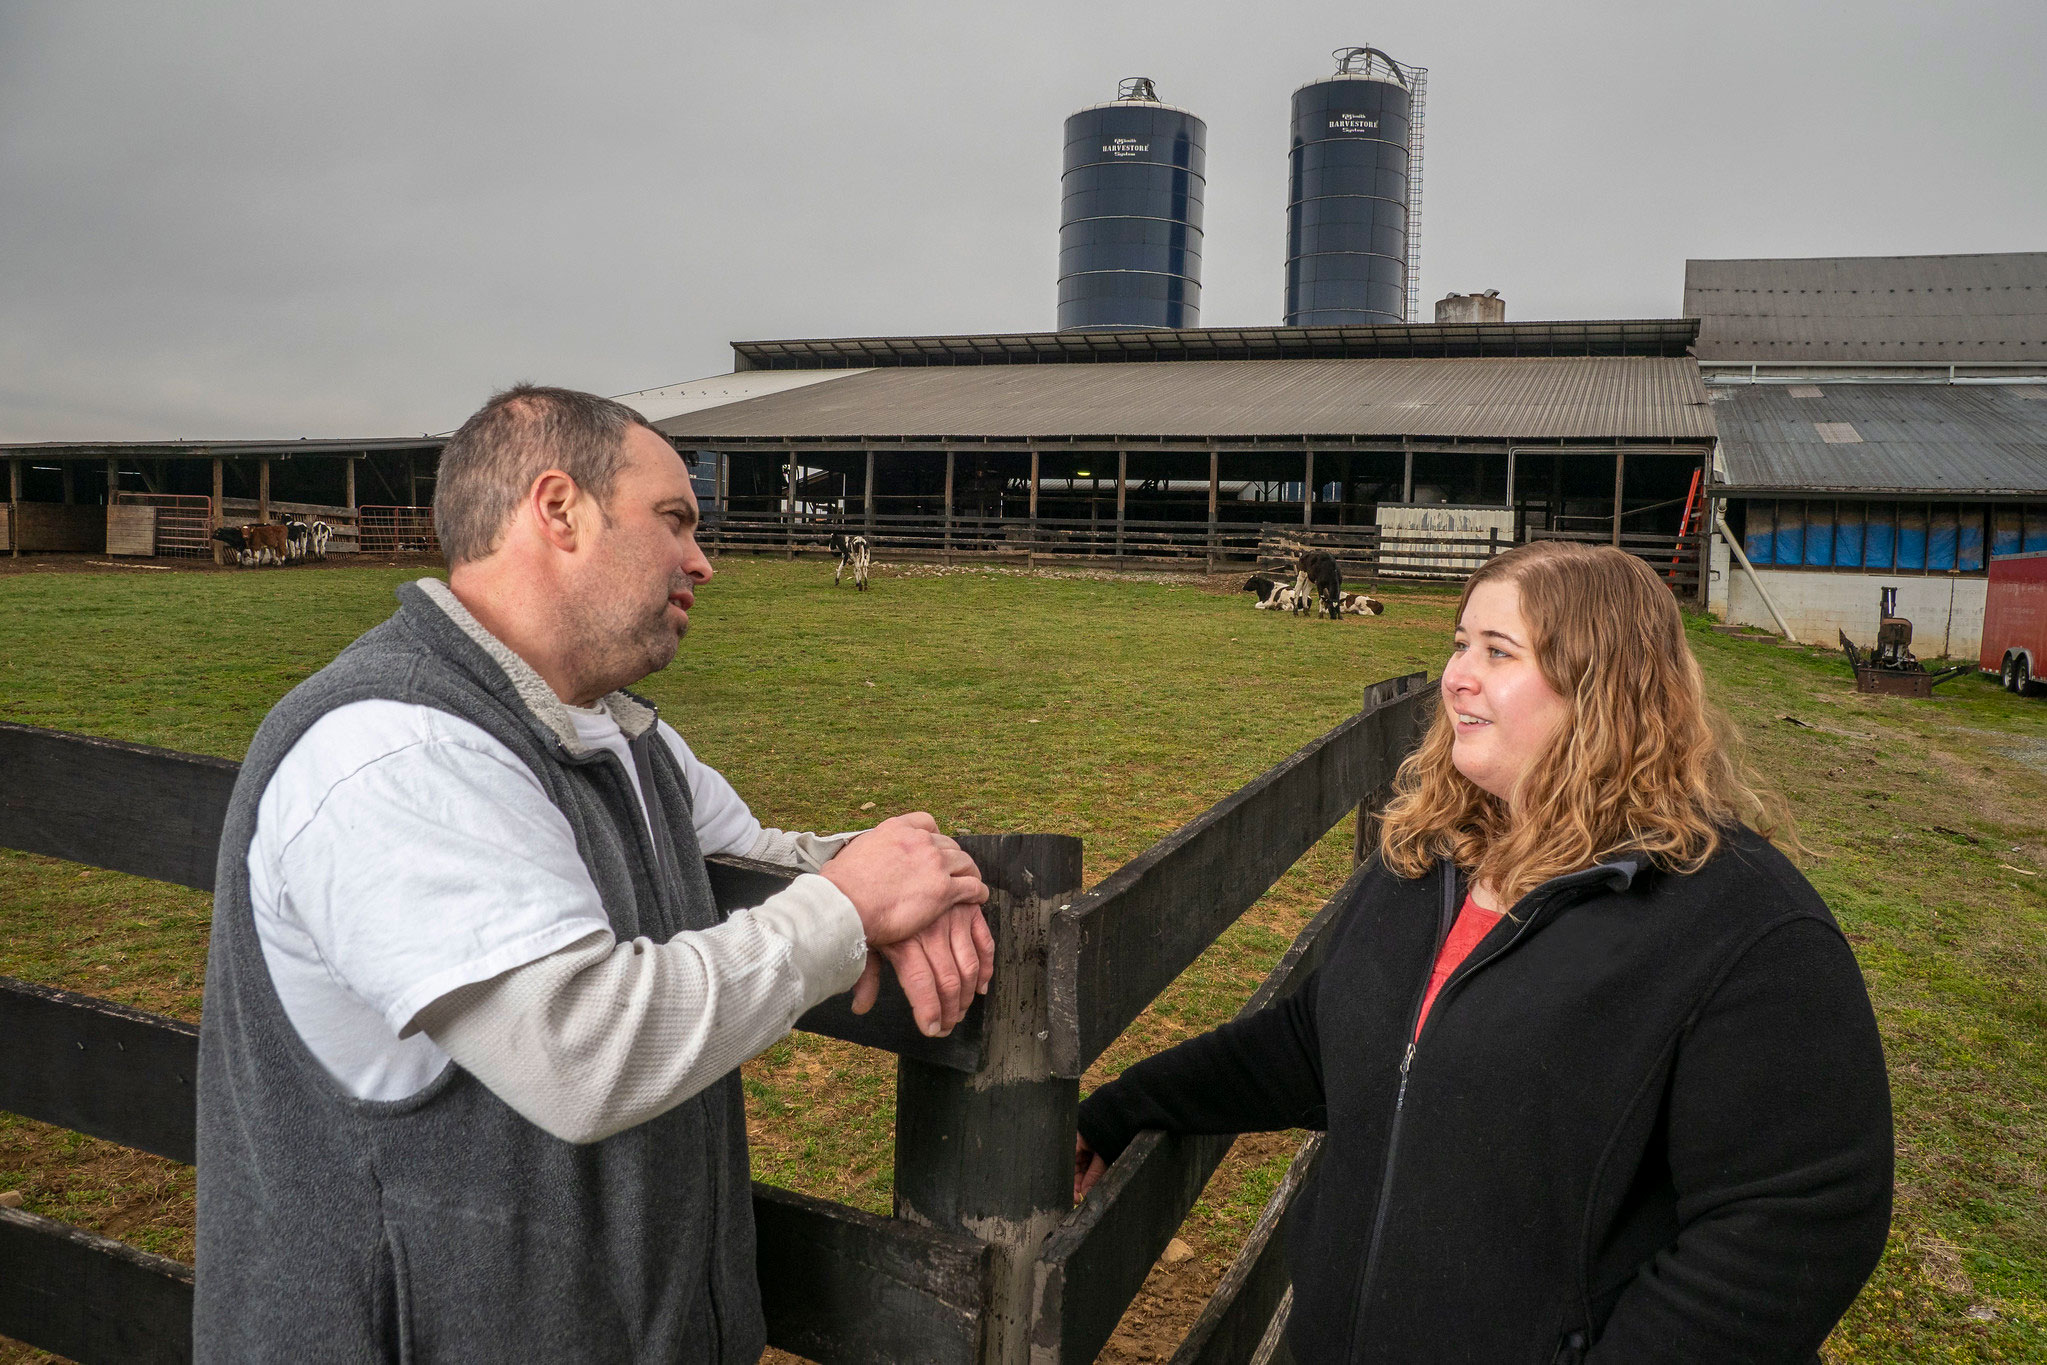 An dairy farmer and site inspector talking near a fence outside a dairy dairy barn.